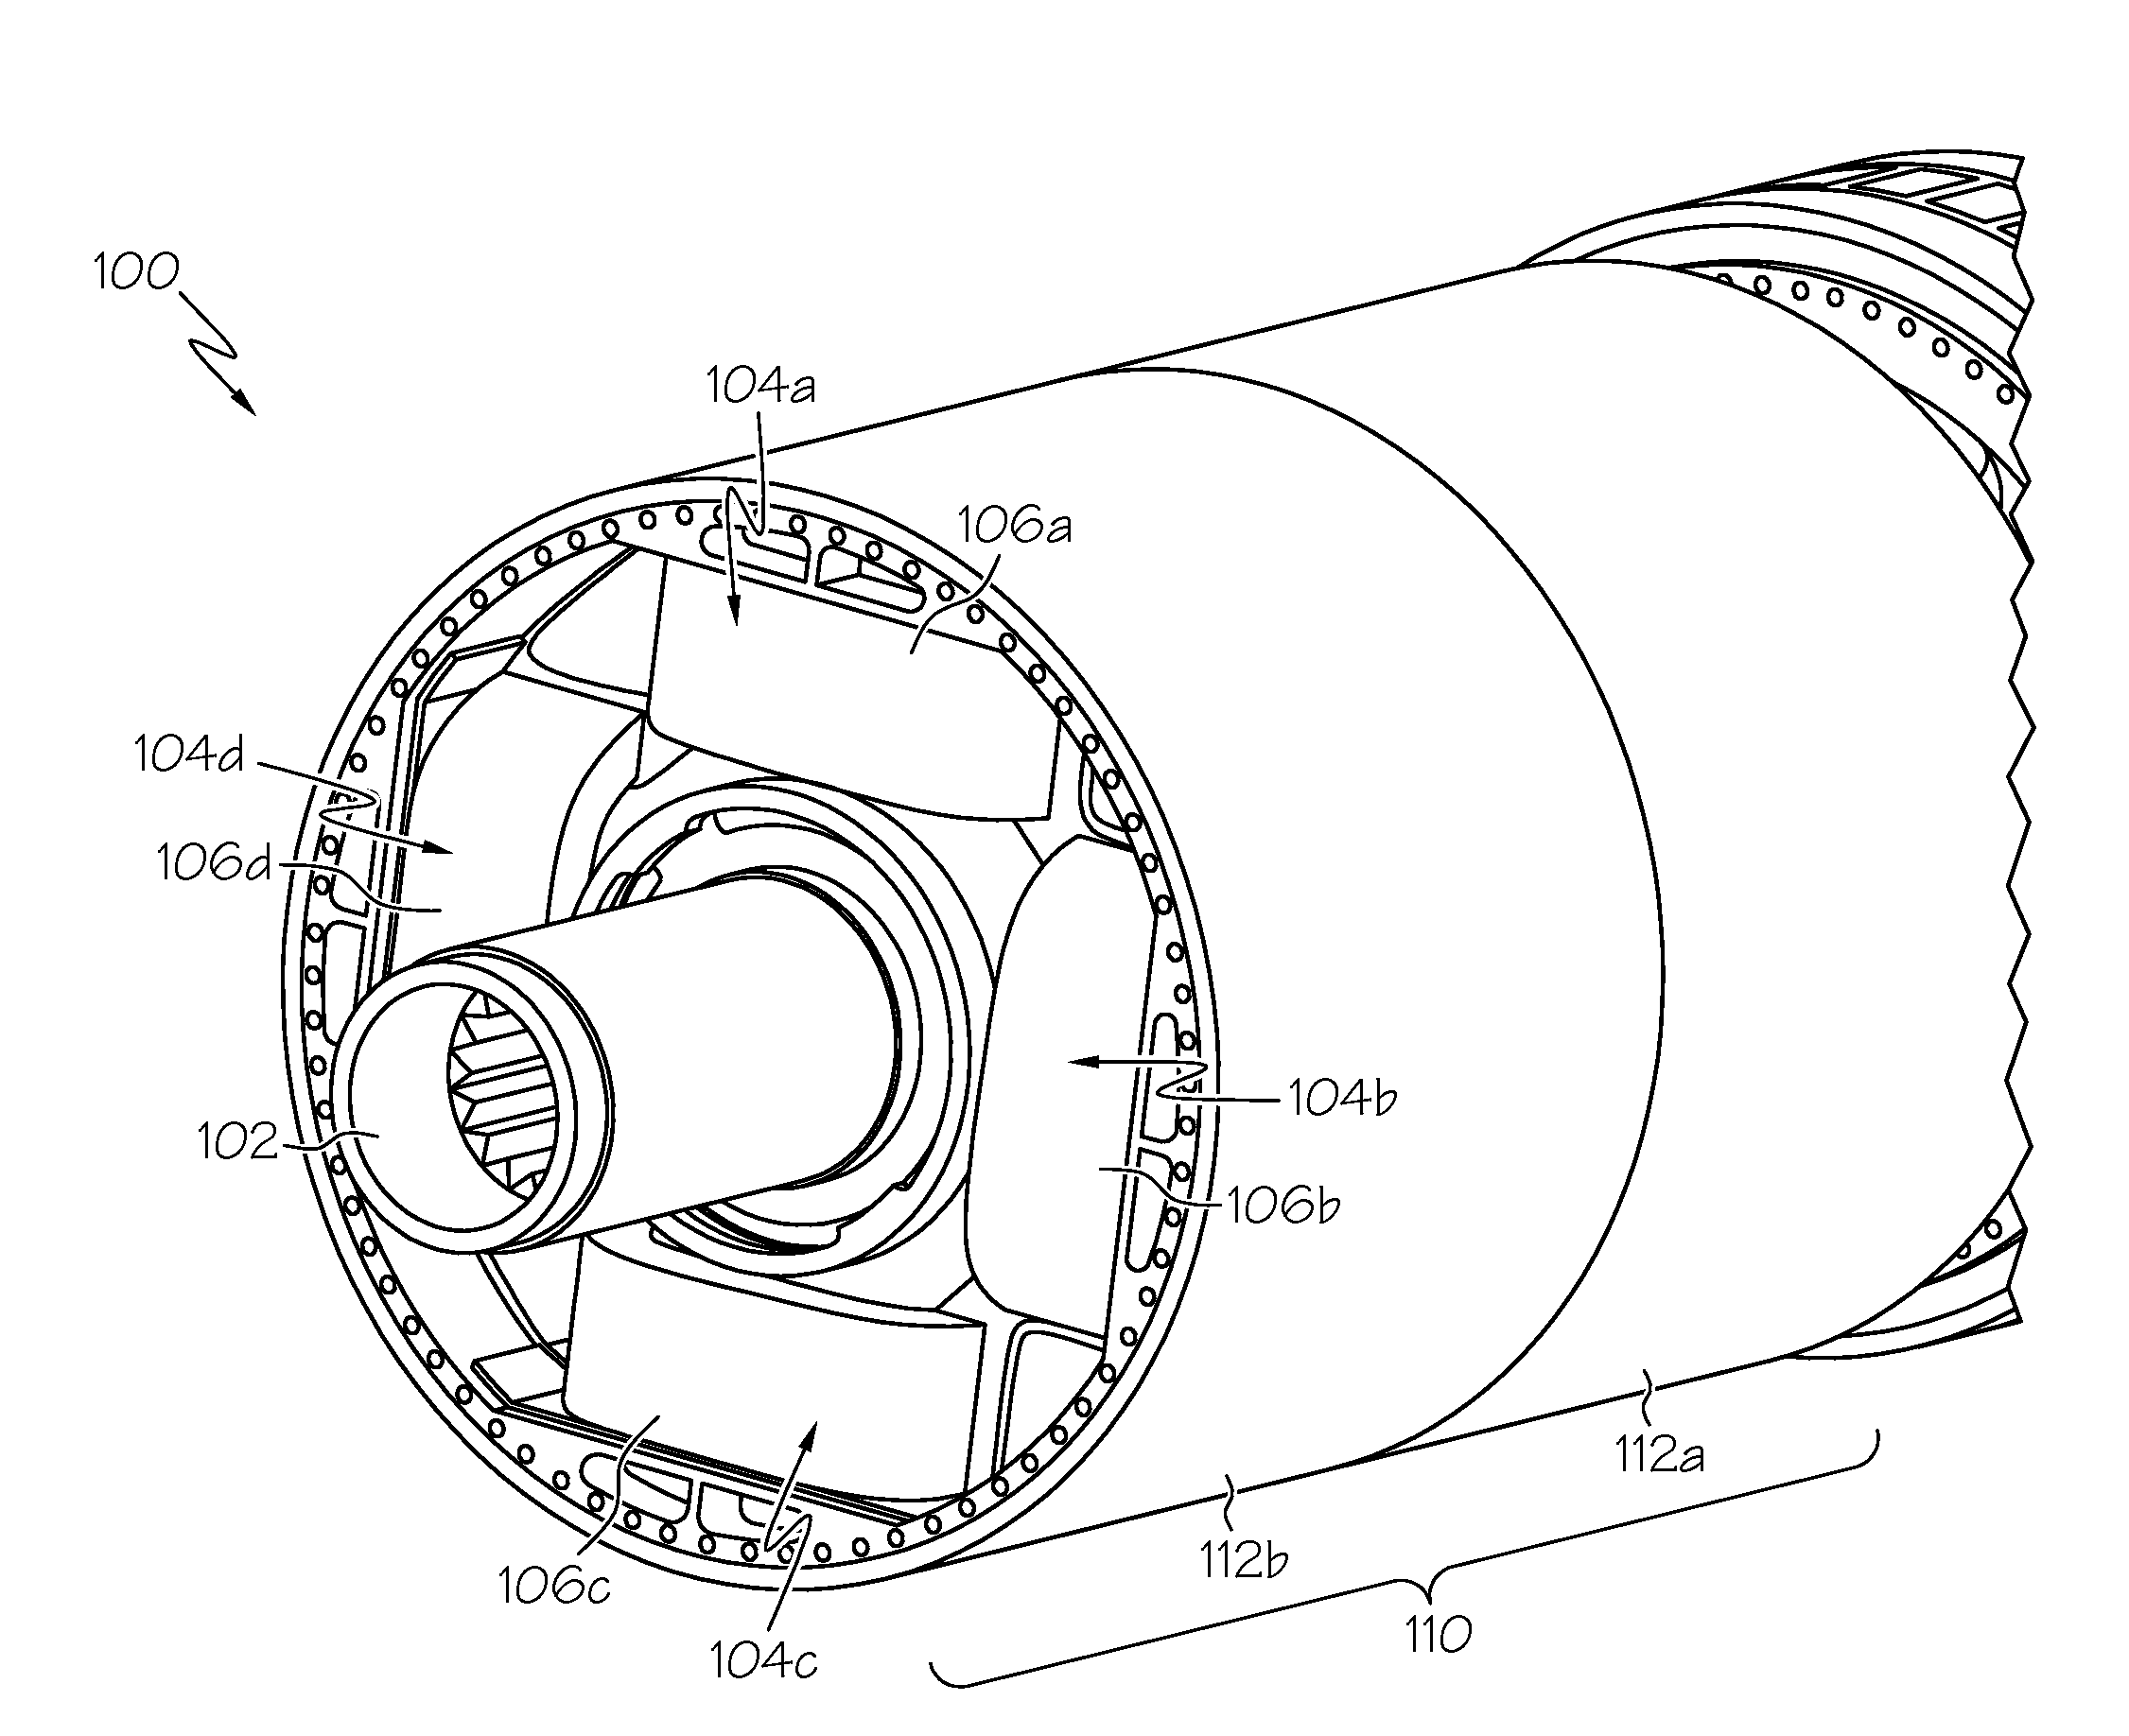 High speed generator rotor design incorporating positively restrained balance rings